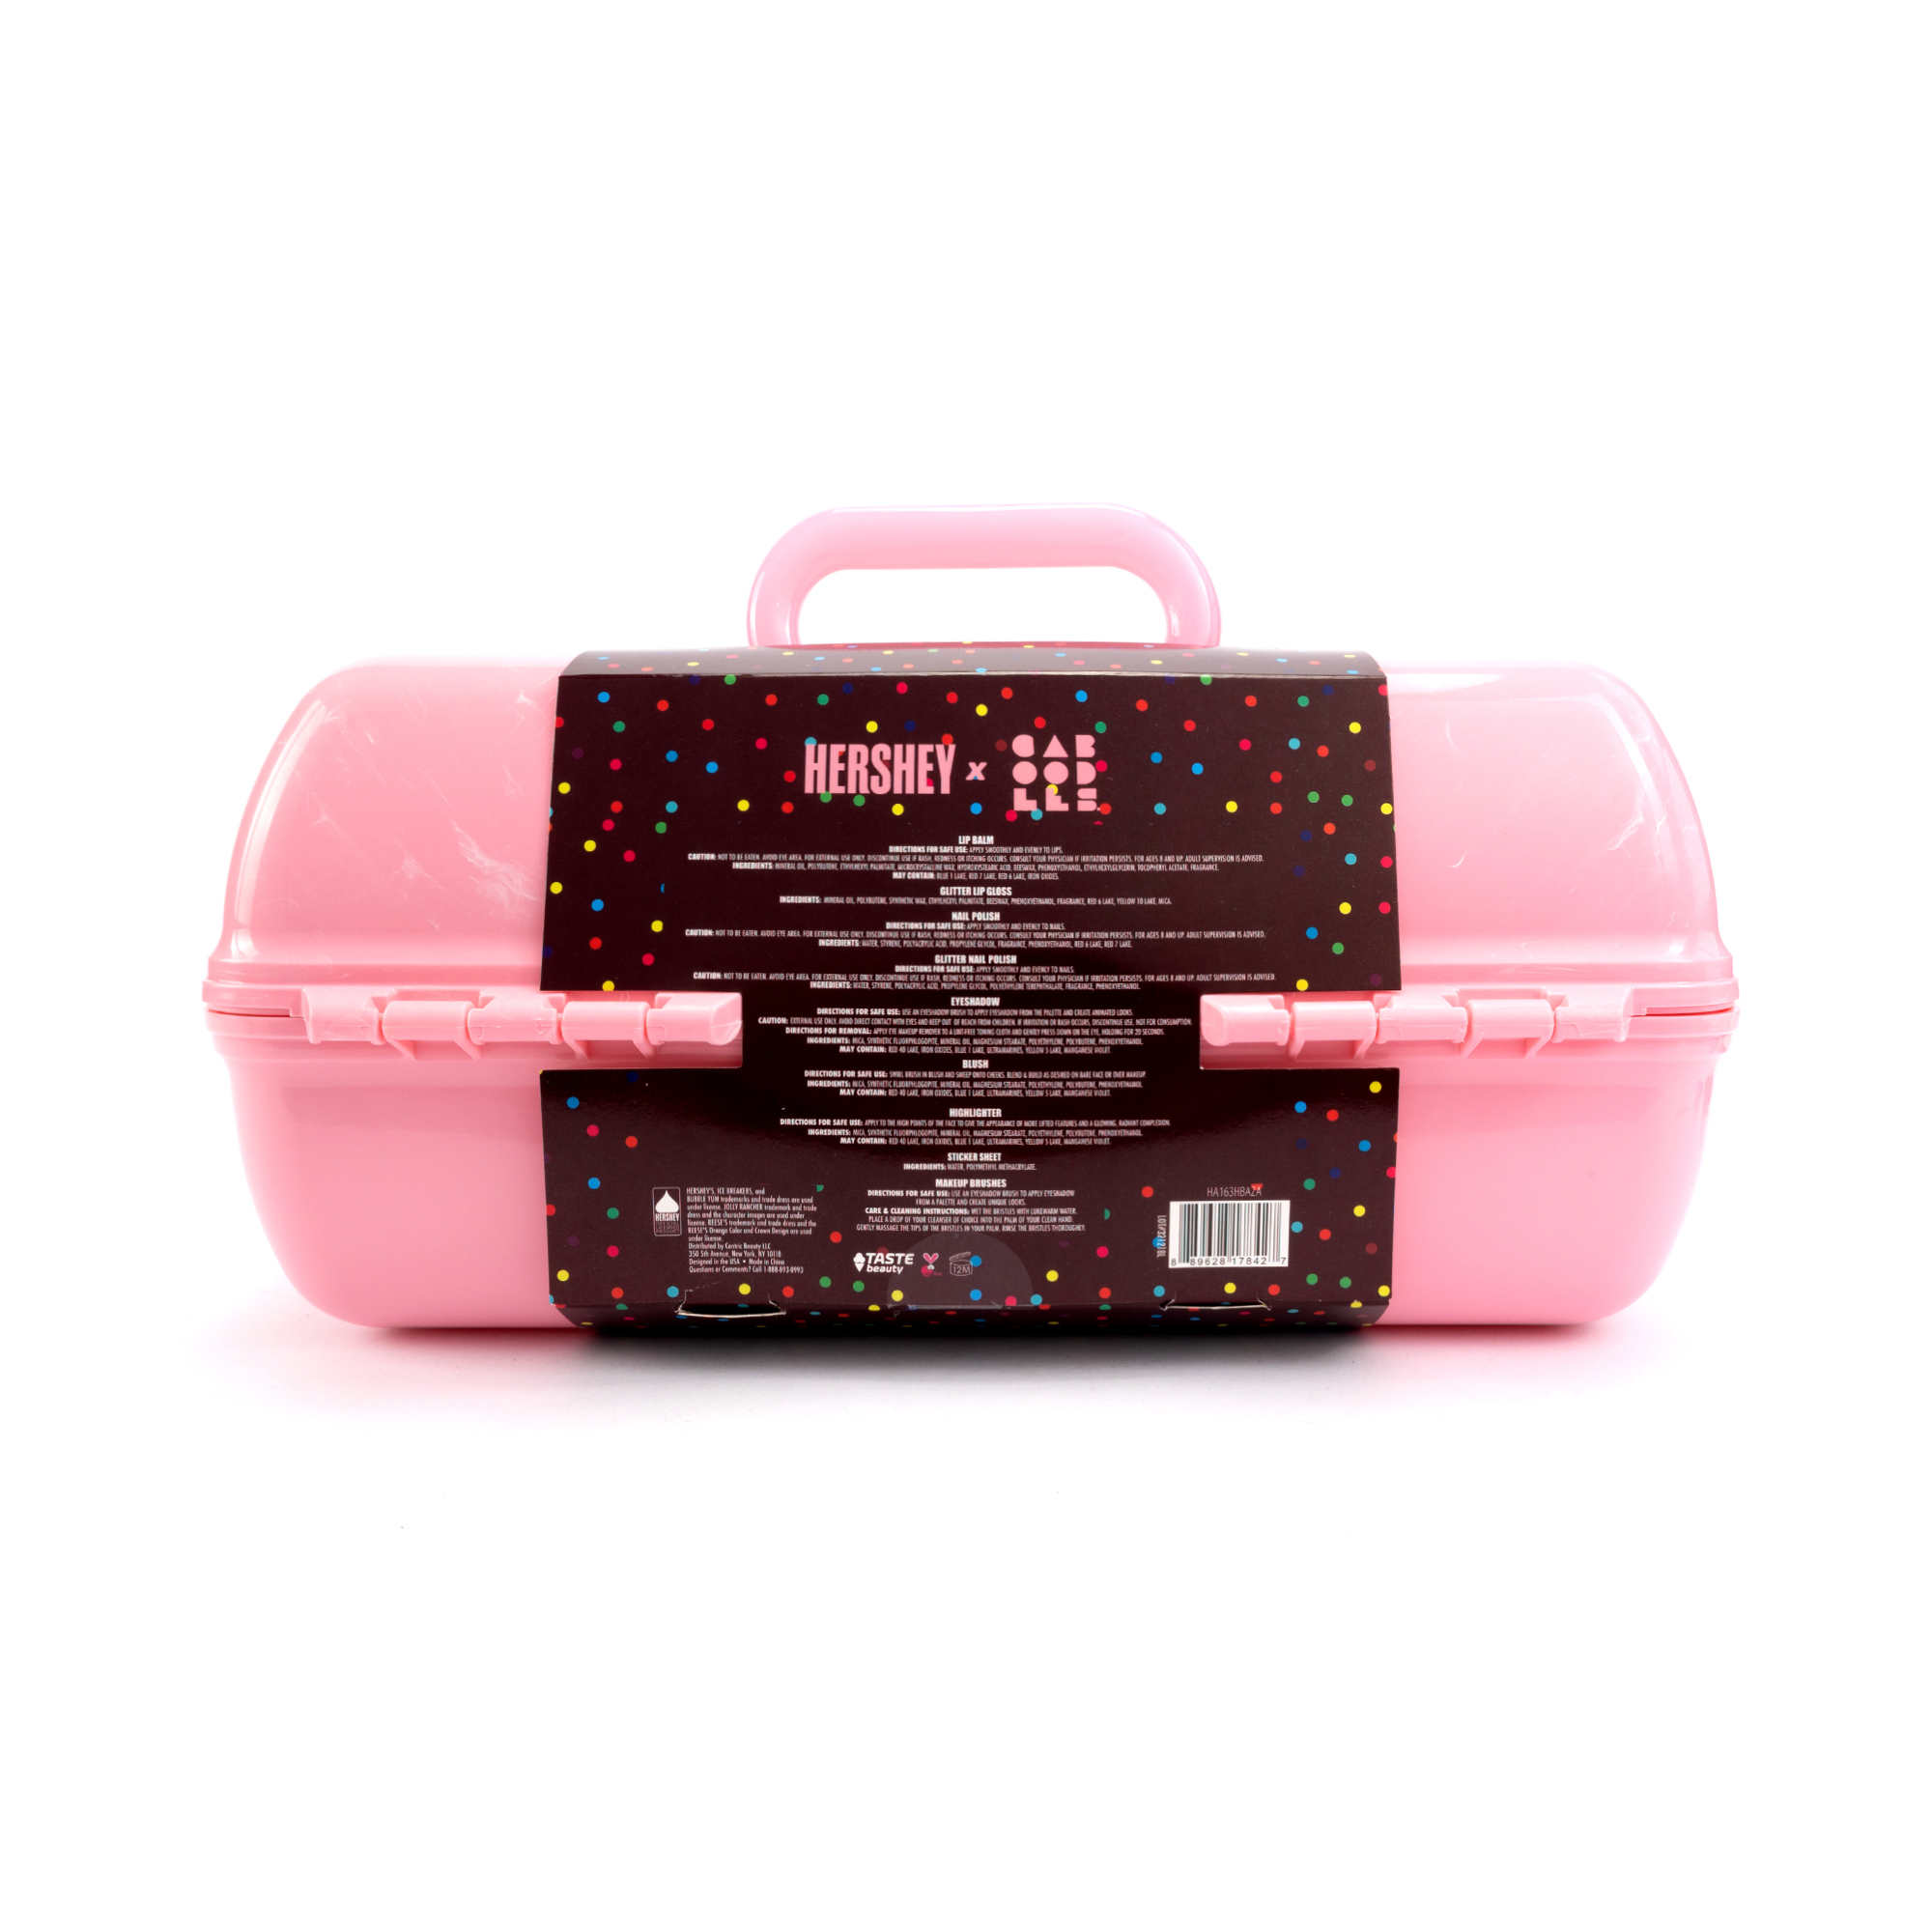 Caboodles x Taste Beauty x Hershey's On The Go Girl Cosmetic case with 13 piece cosmetic set - image 5 of 6